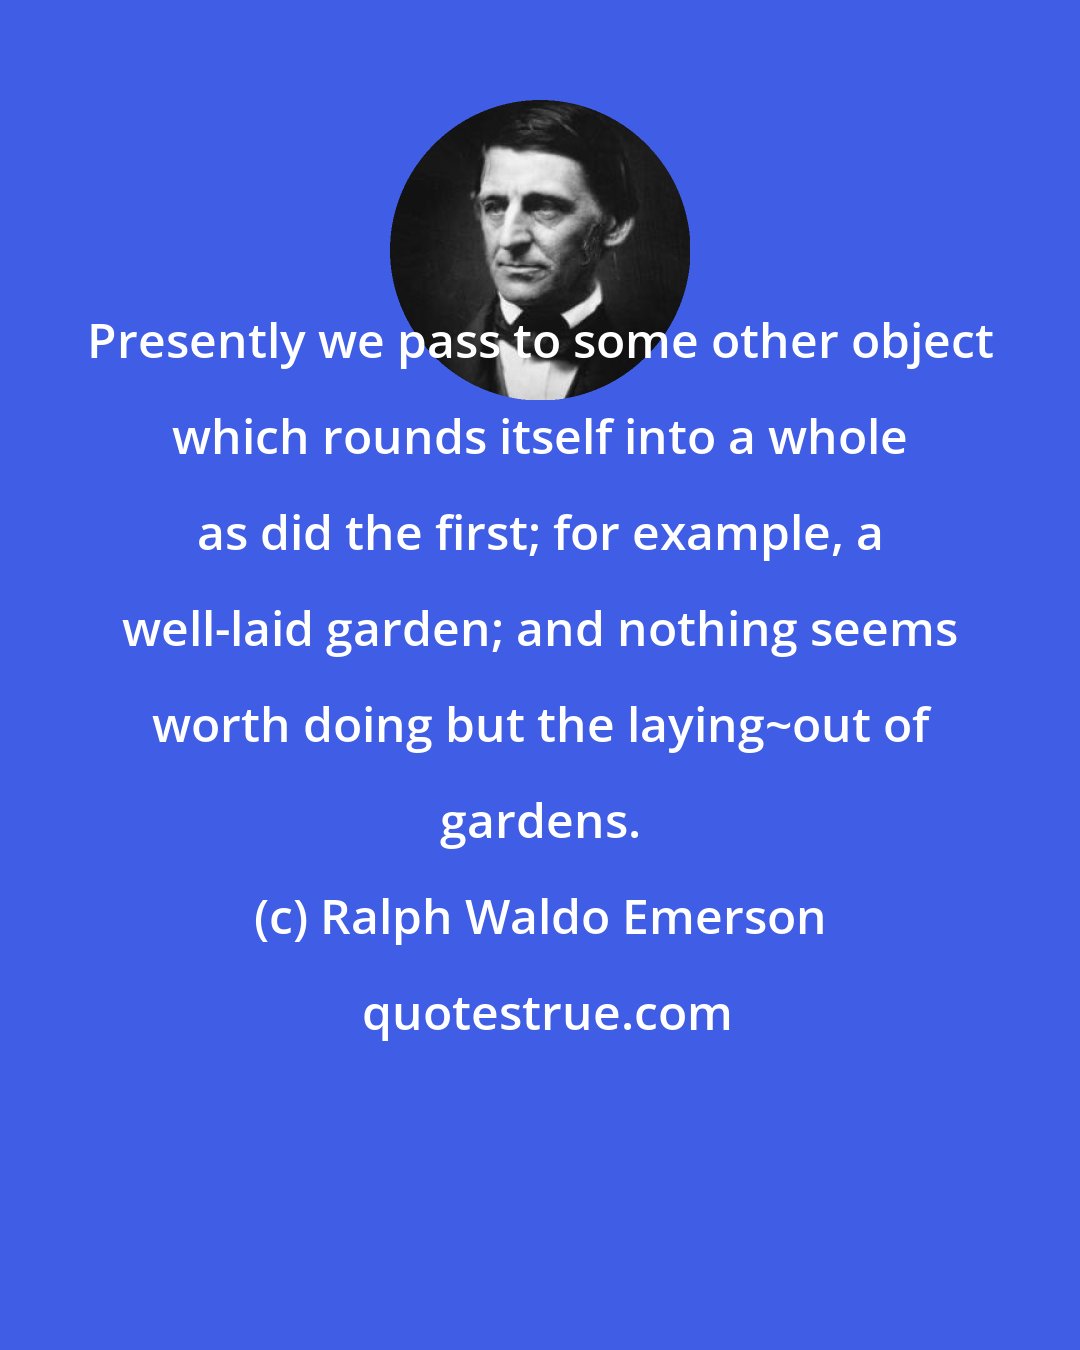 Ralph Waldo Emerson: Presently we pass to some other object which rounds itself into a whole as did the first; for example, a well-laid garden; and nothing seems worth doing but the laying~out of gardens.